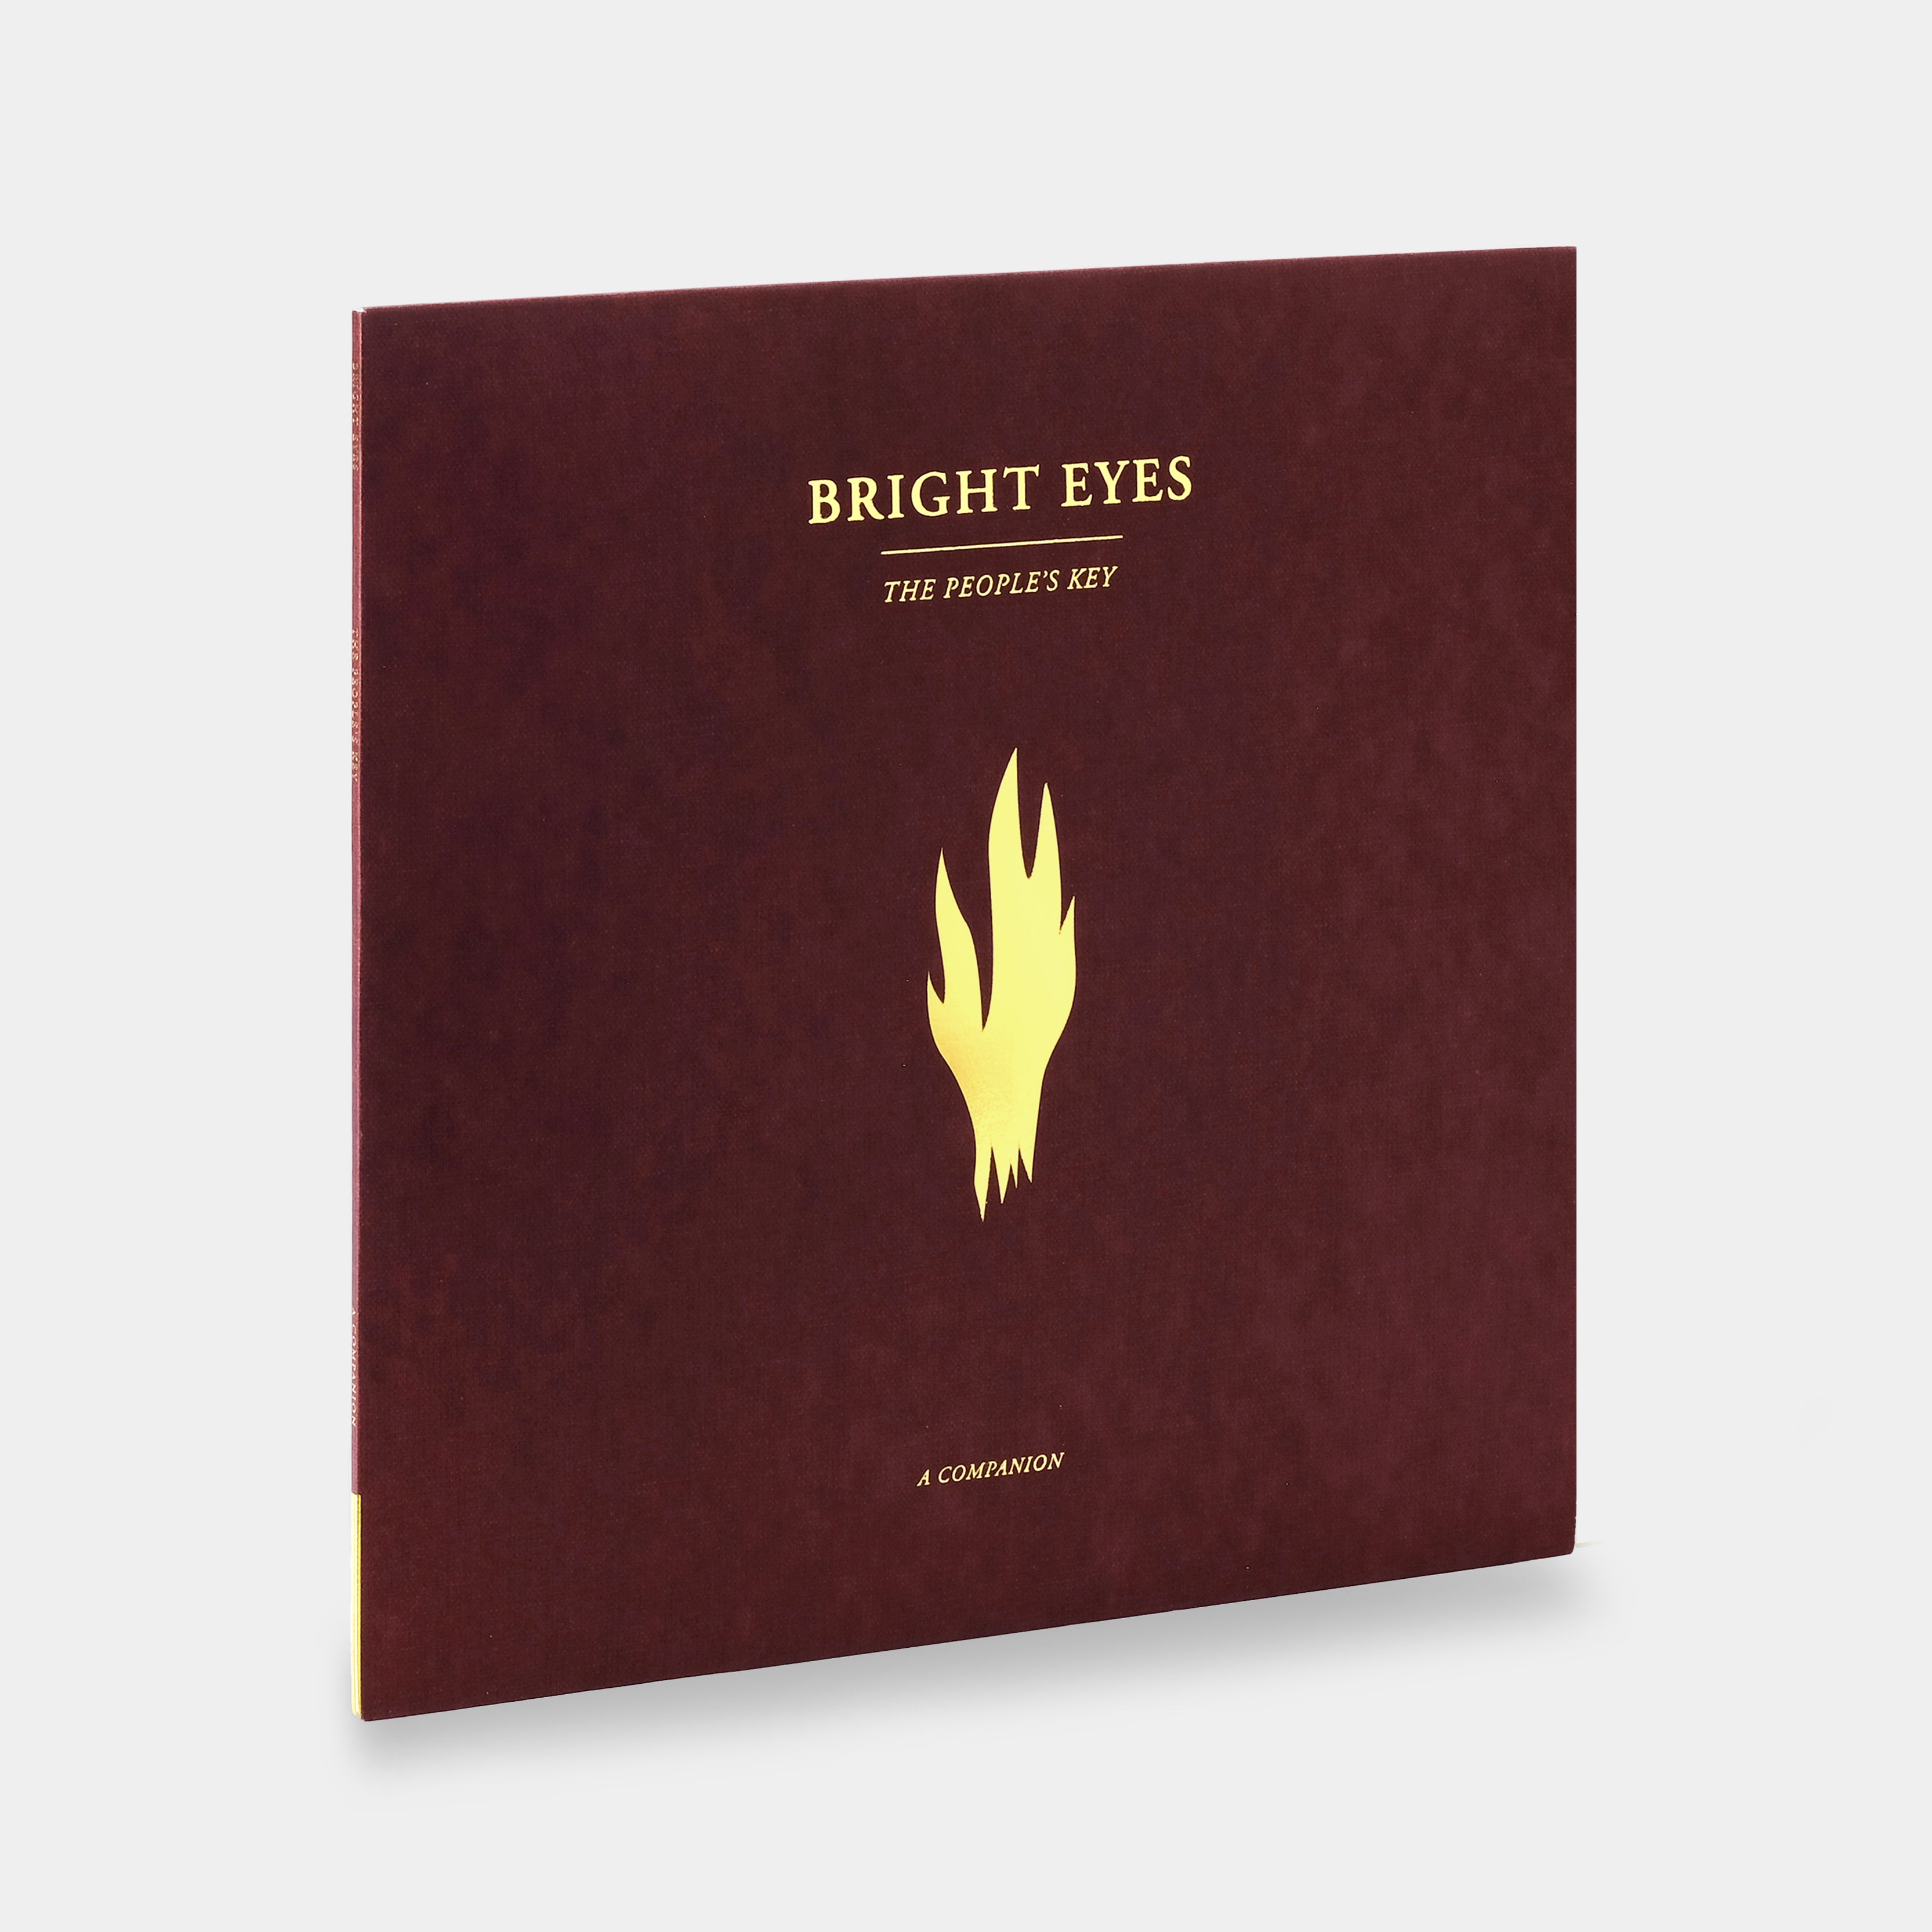 Bright Eyes - The People's Key (A Companion) EP Opaque Gold Vinyl Record